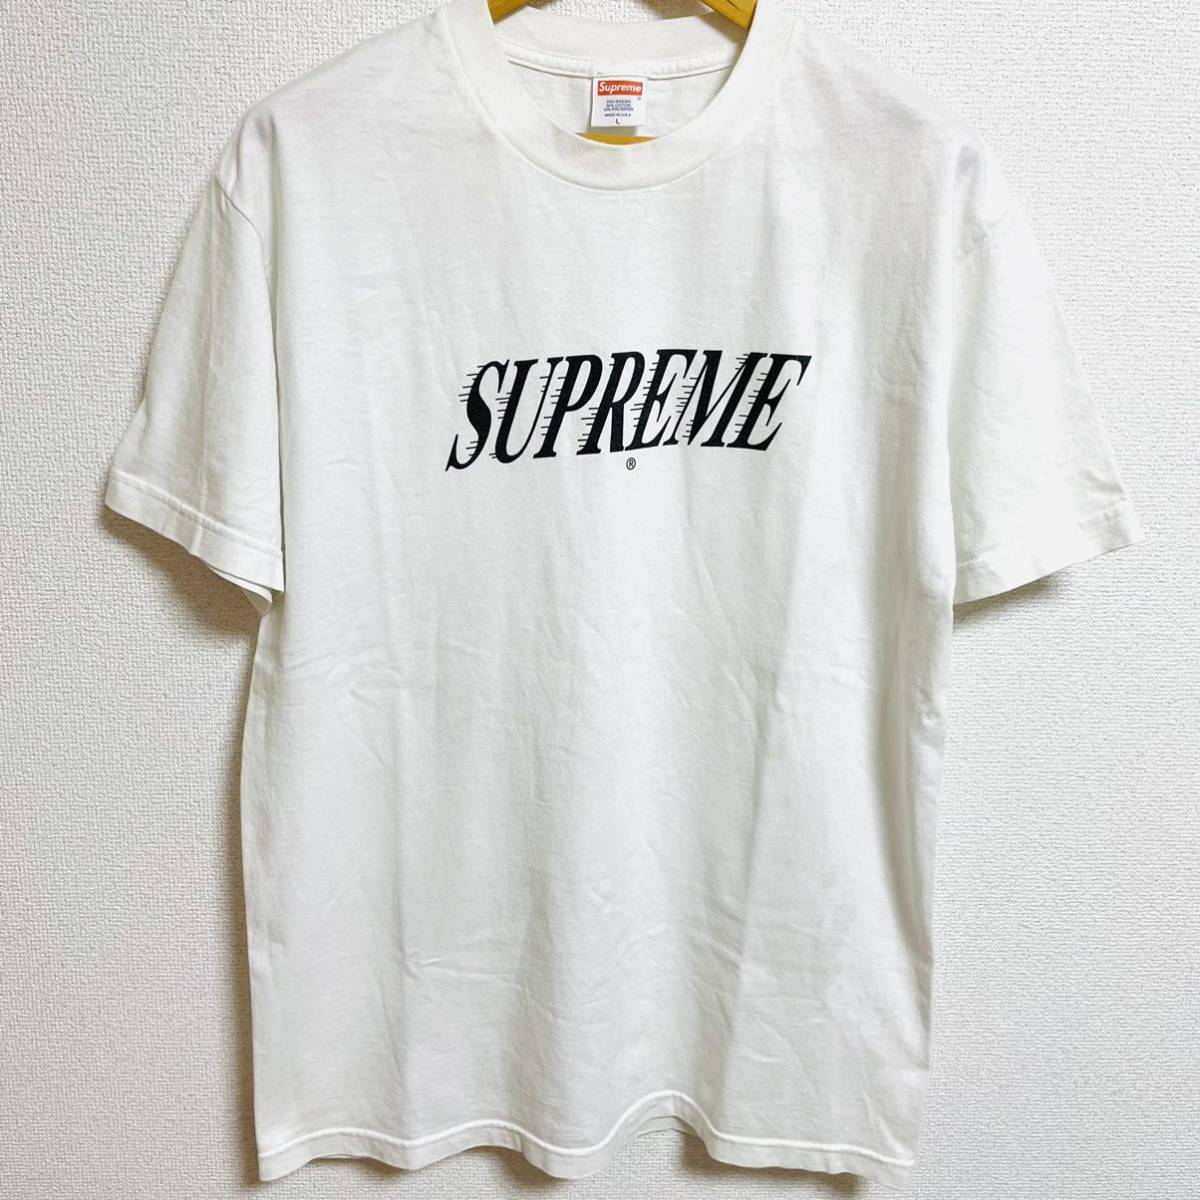 Supreme Bitch Please Tee White Black L 07aw 2007年 白 黒 ビッチプリーズ Lakers レイカース 胸ロゴ デカロゴ 初期 OLD Vintage_画像1